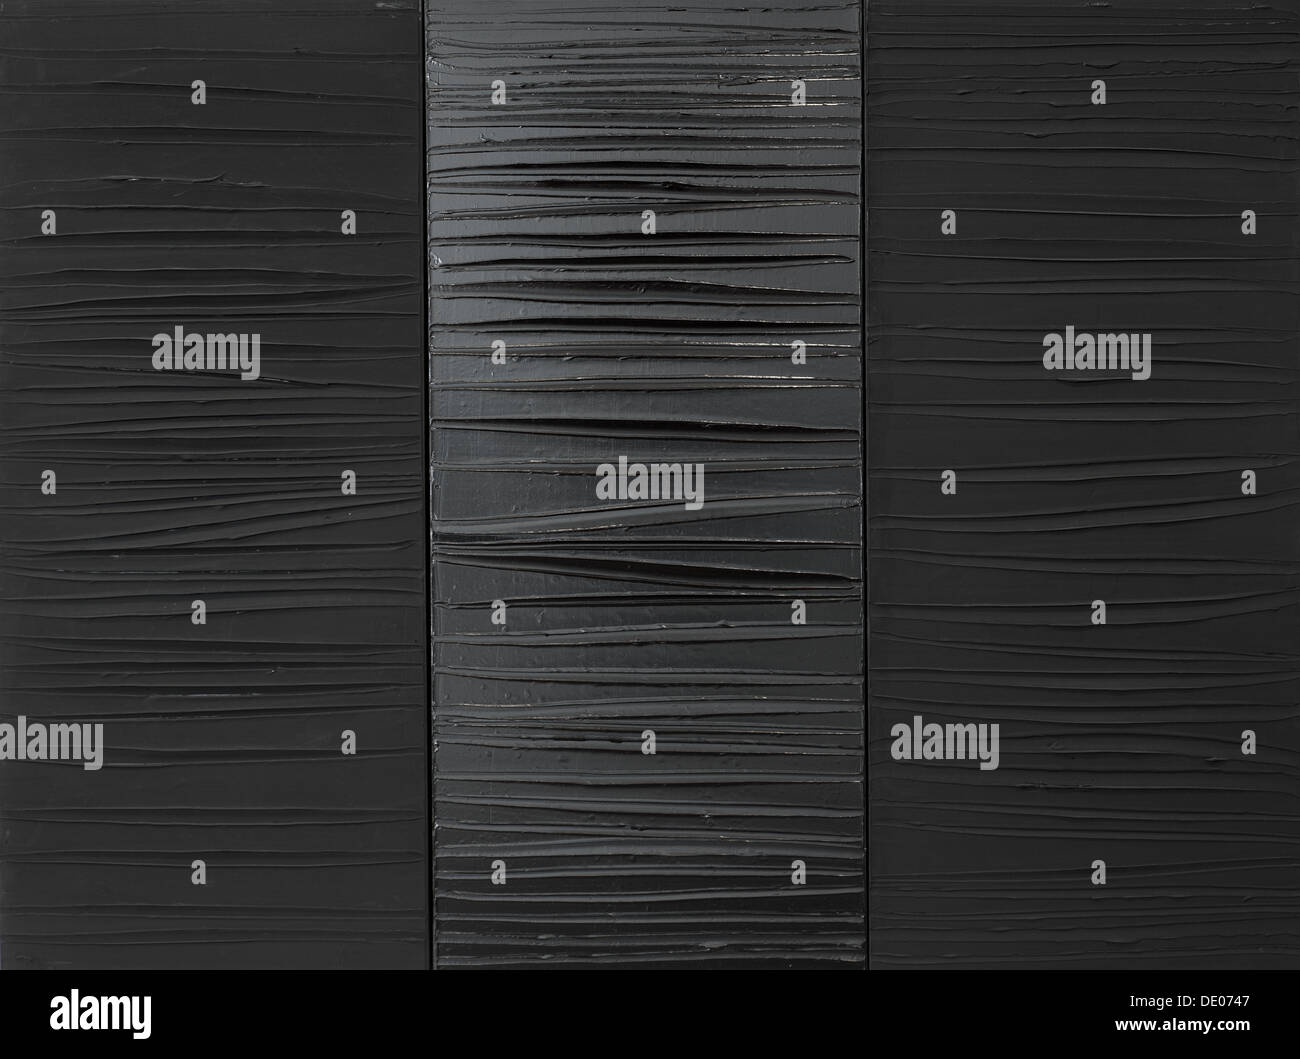 21th century  -  Painting 181 x 244 cm, 2009 - Pierre Soulages Philippe Sauvan-Magnet / Active Museum Oil on canvas Stock Photo